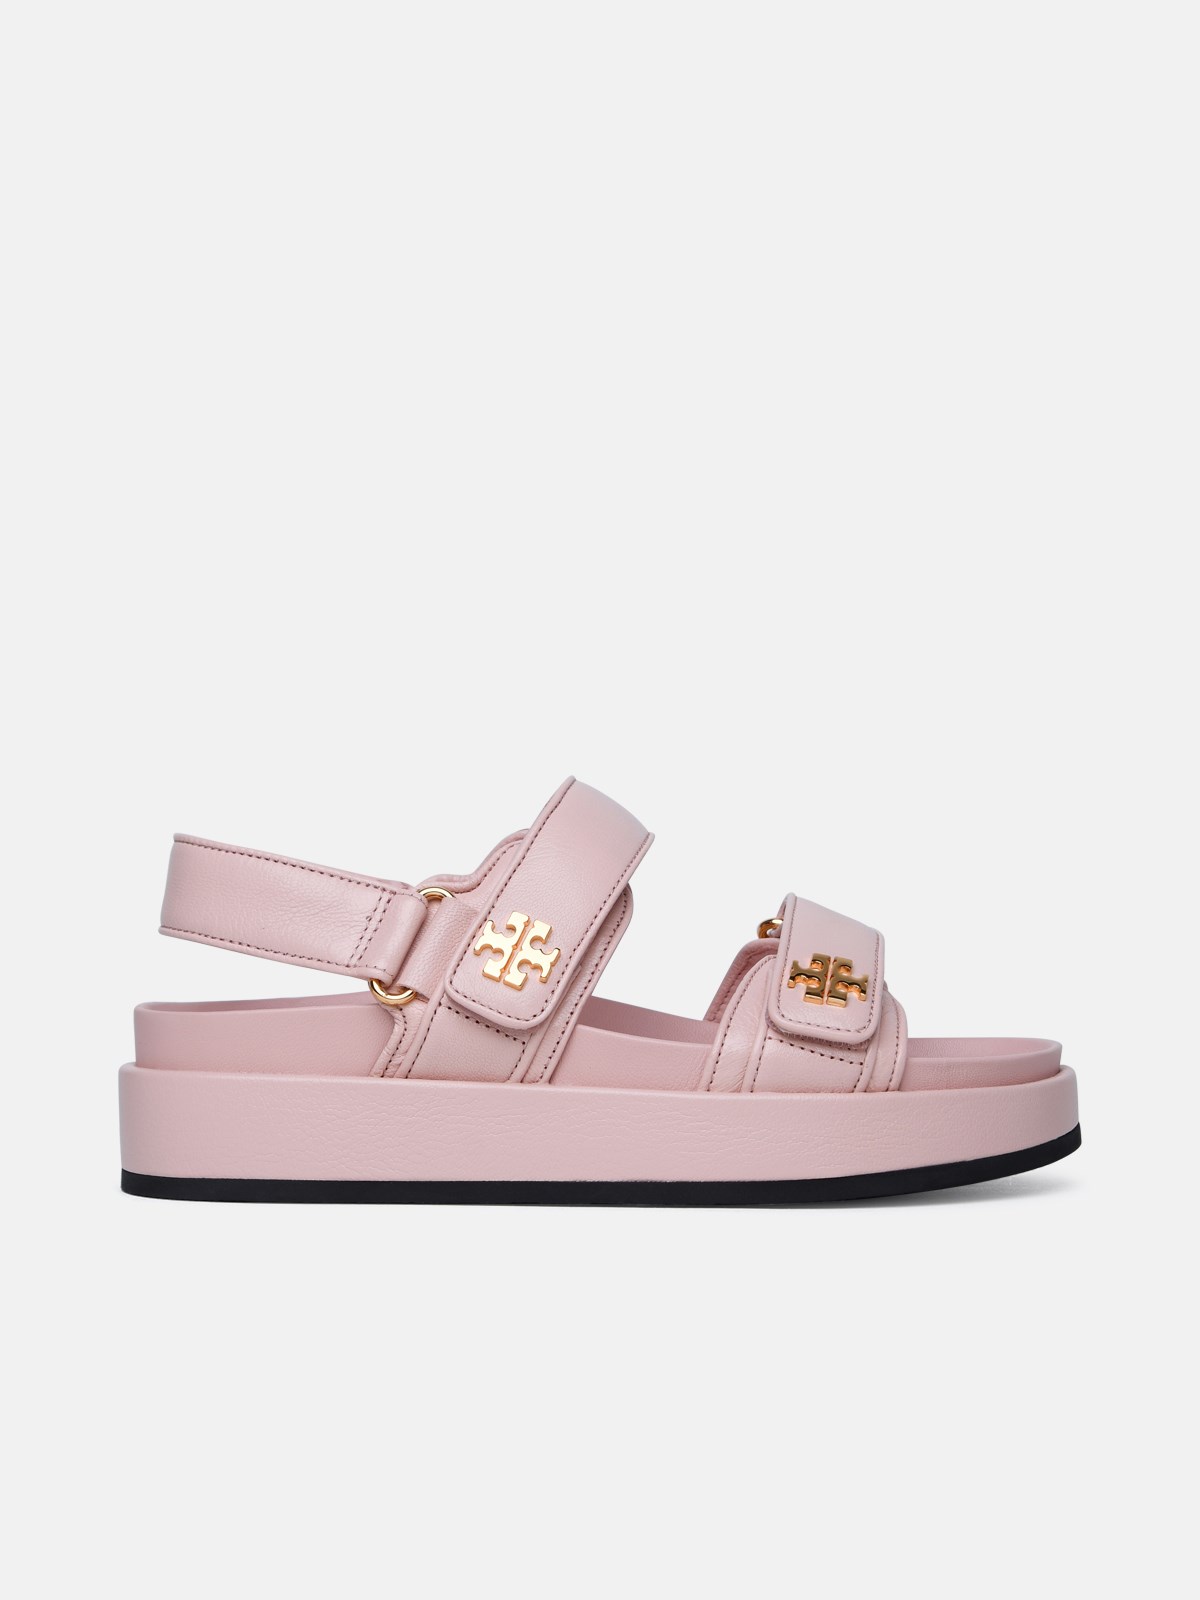 Shop Tory Burch 'kira' Pink Leather Sporty Sandals